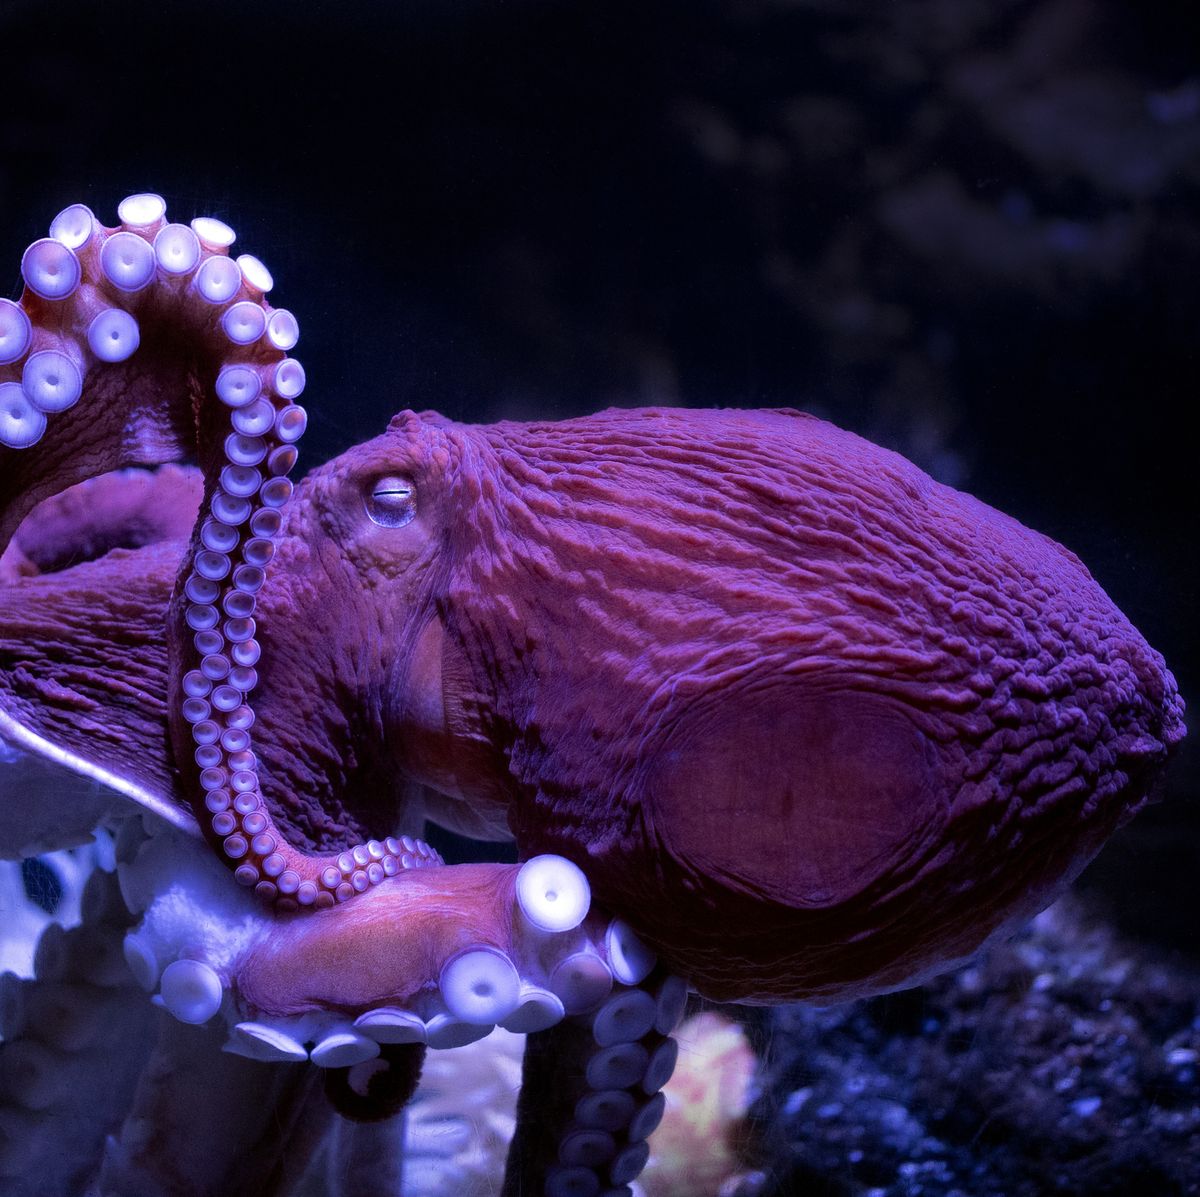 7 Incredible Octopus Facts That'll Make You Love Cephalopods